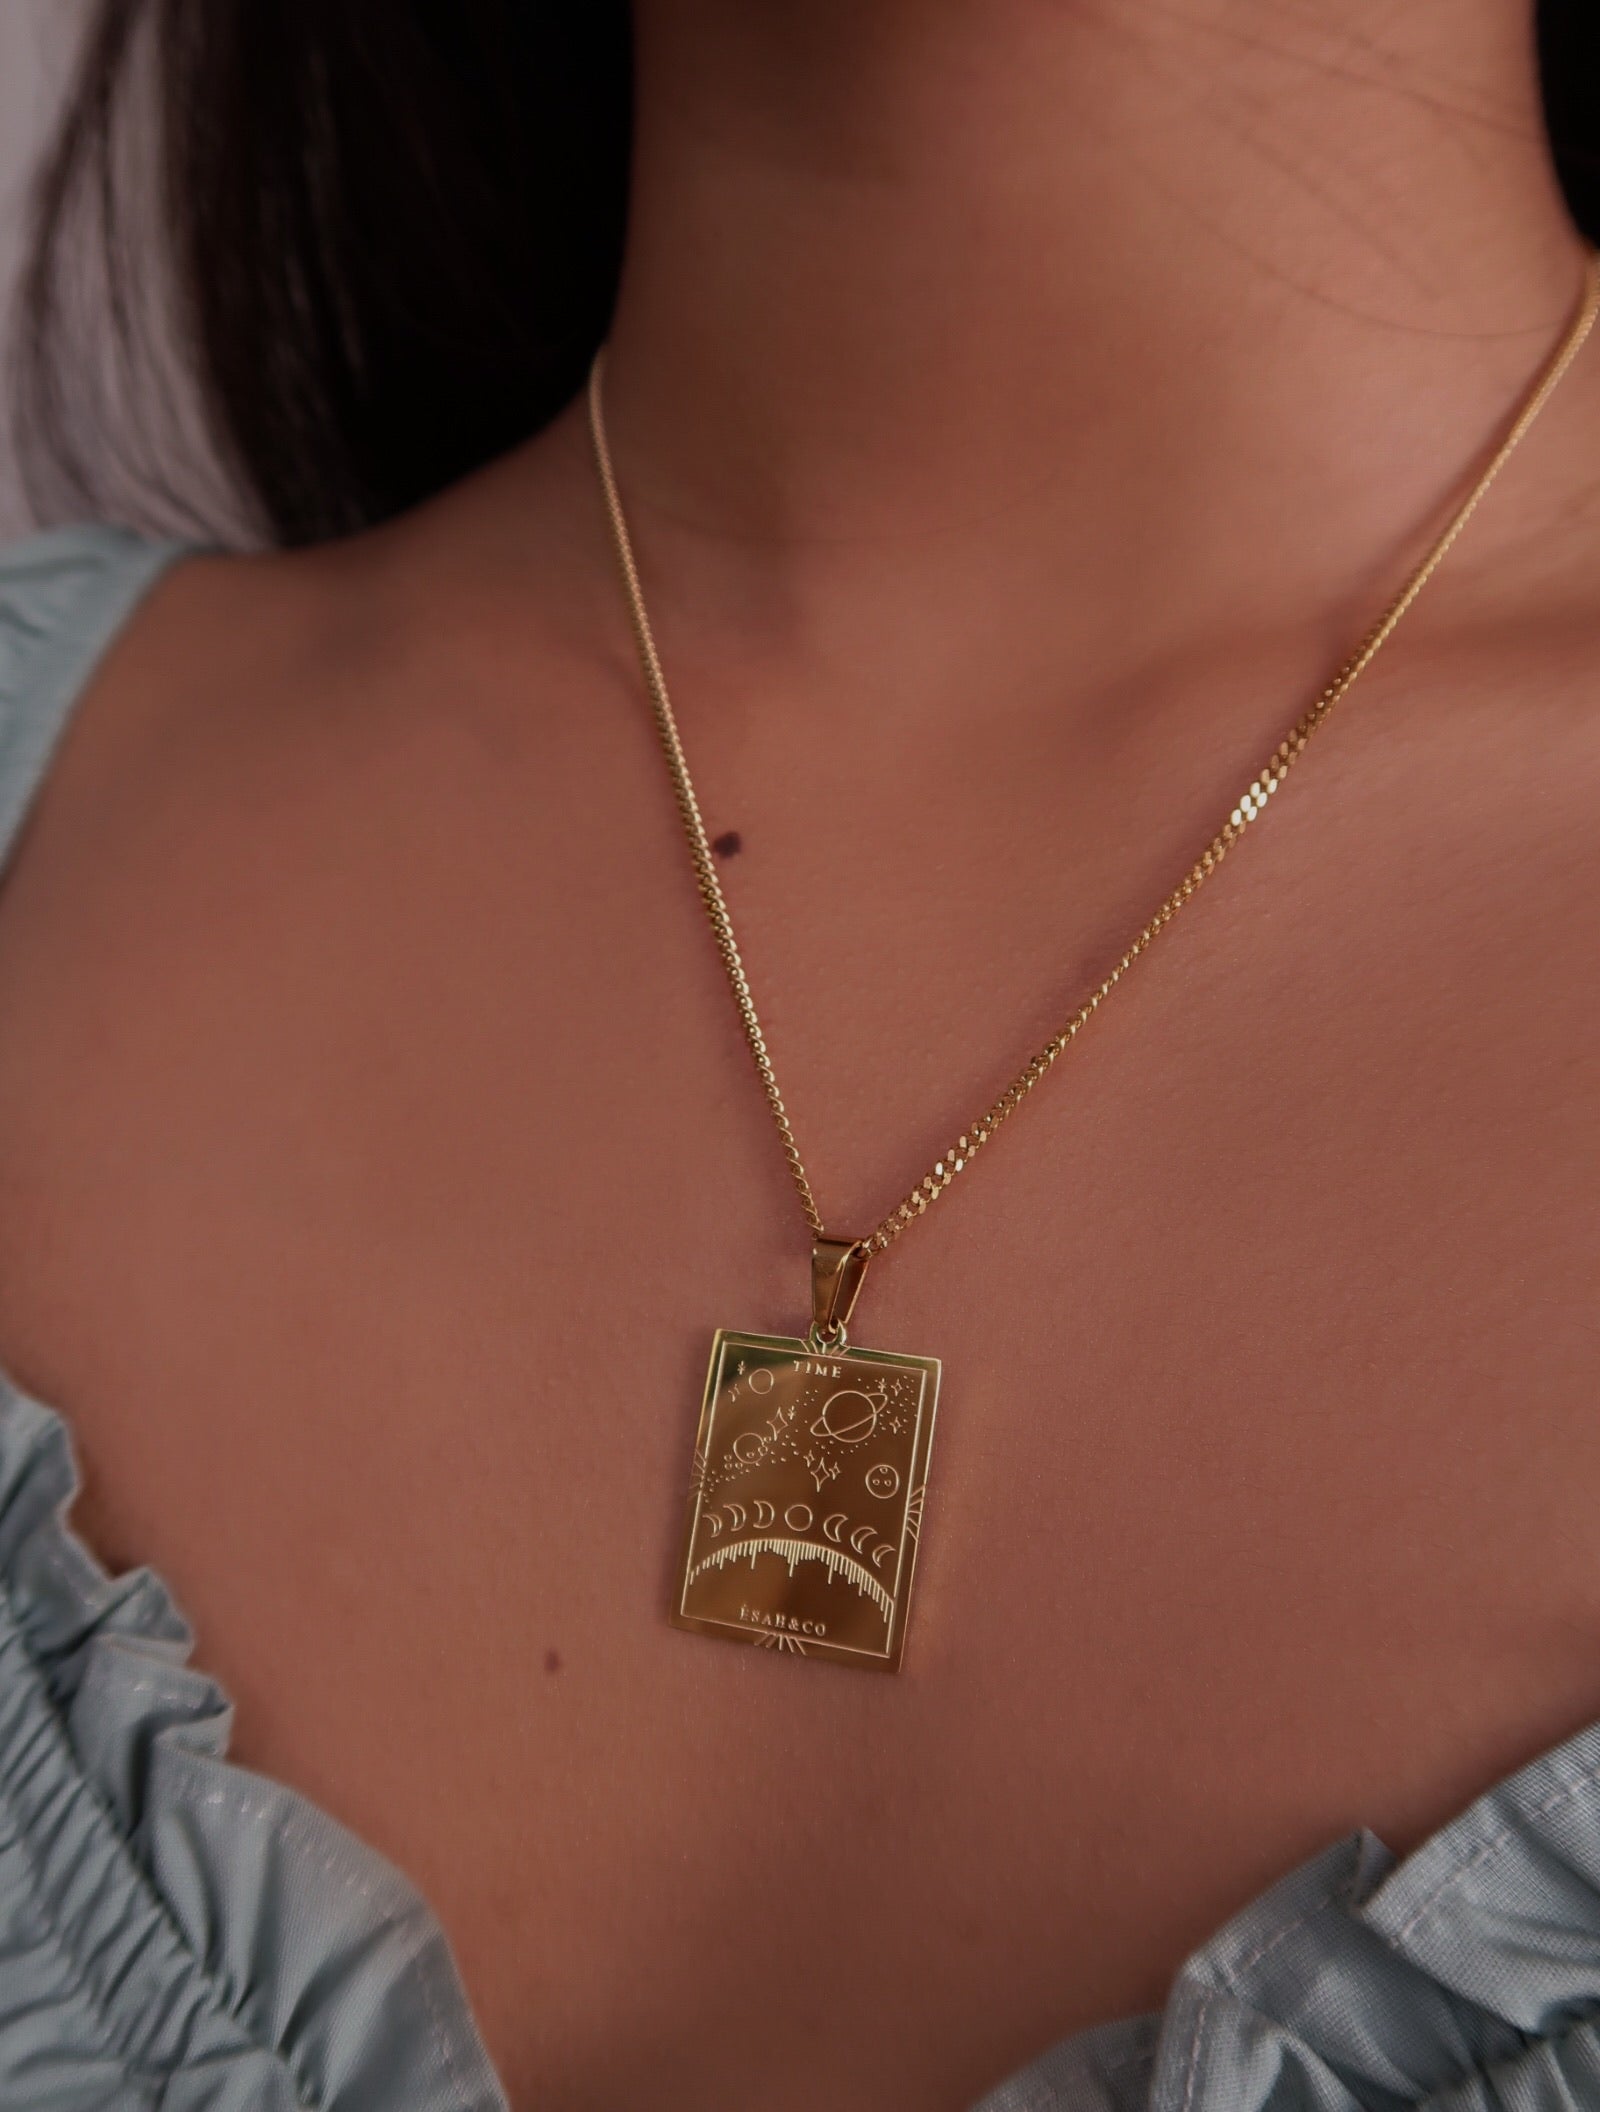 TIME Affirmation Pendant Necklace - Esah and Co